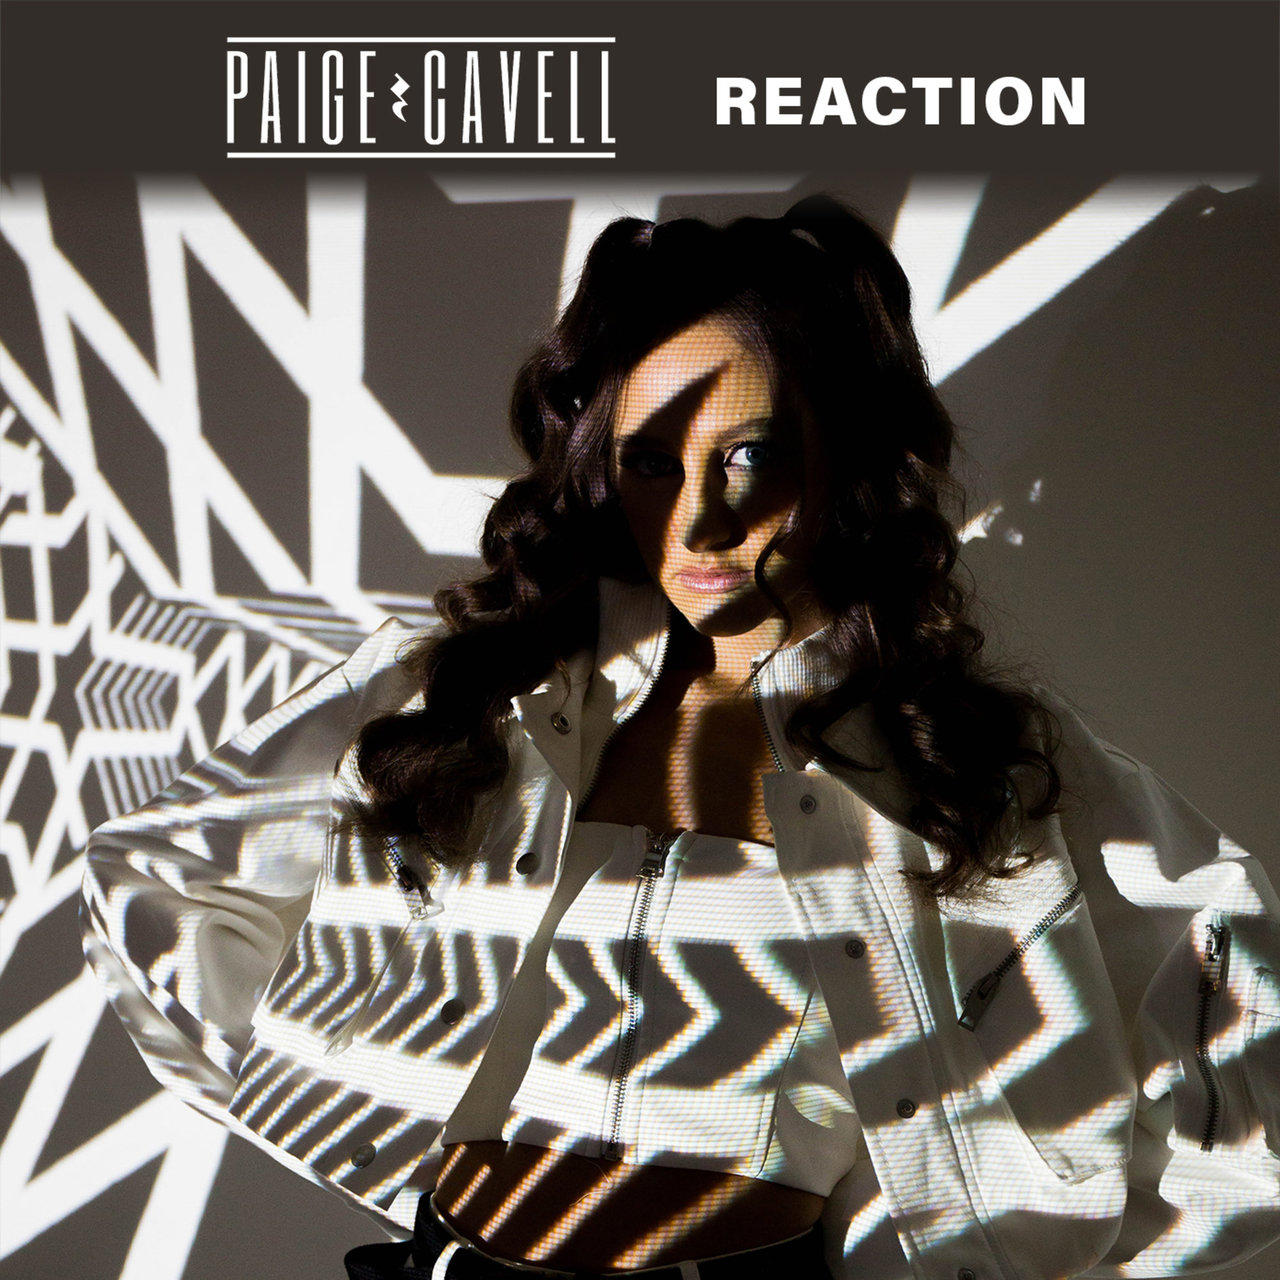 Paige Cavell Reaction cover artwork